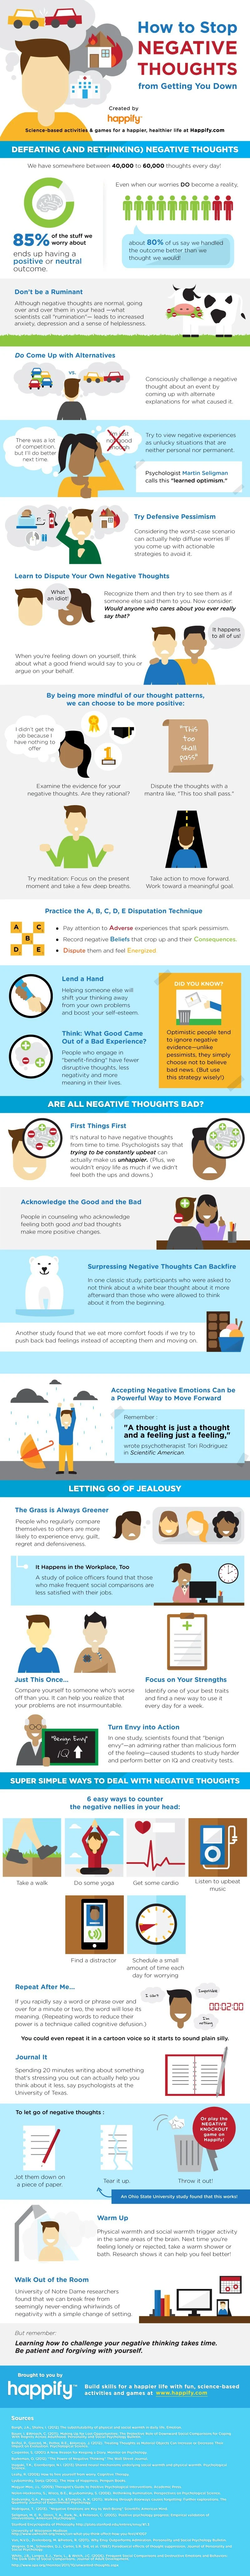 How To Stop Negative Thoughts From Getting You Down - #infographic